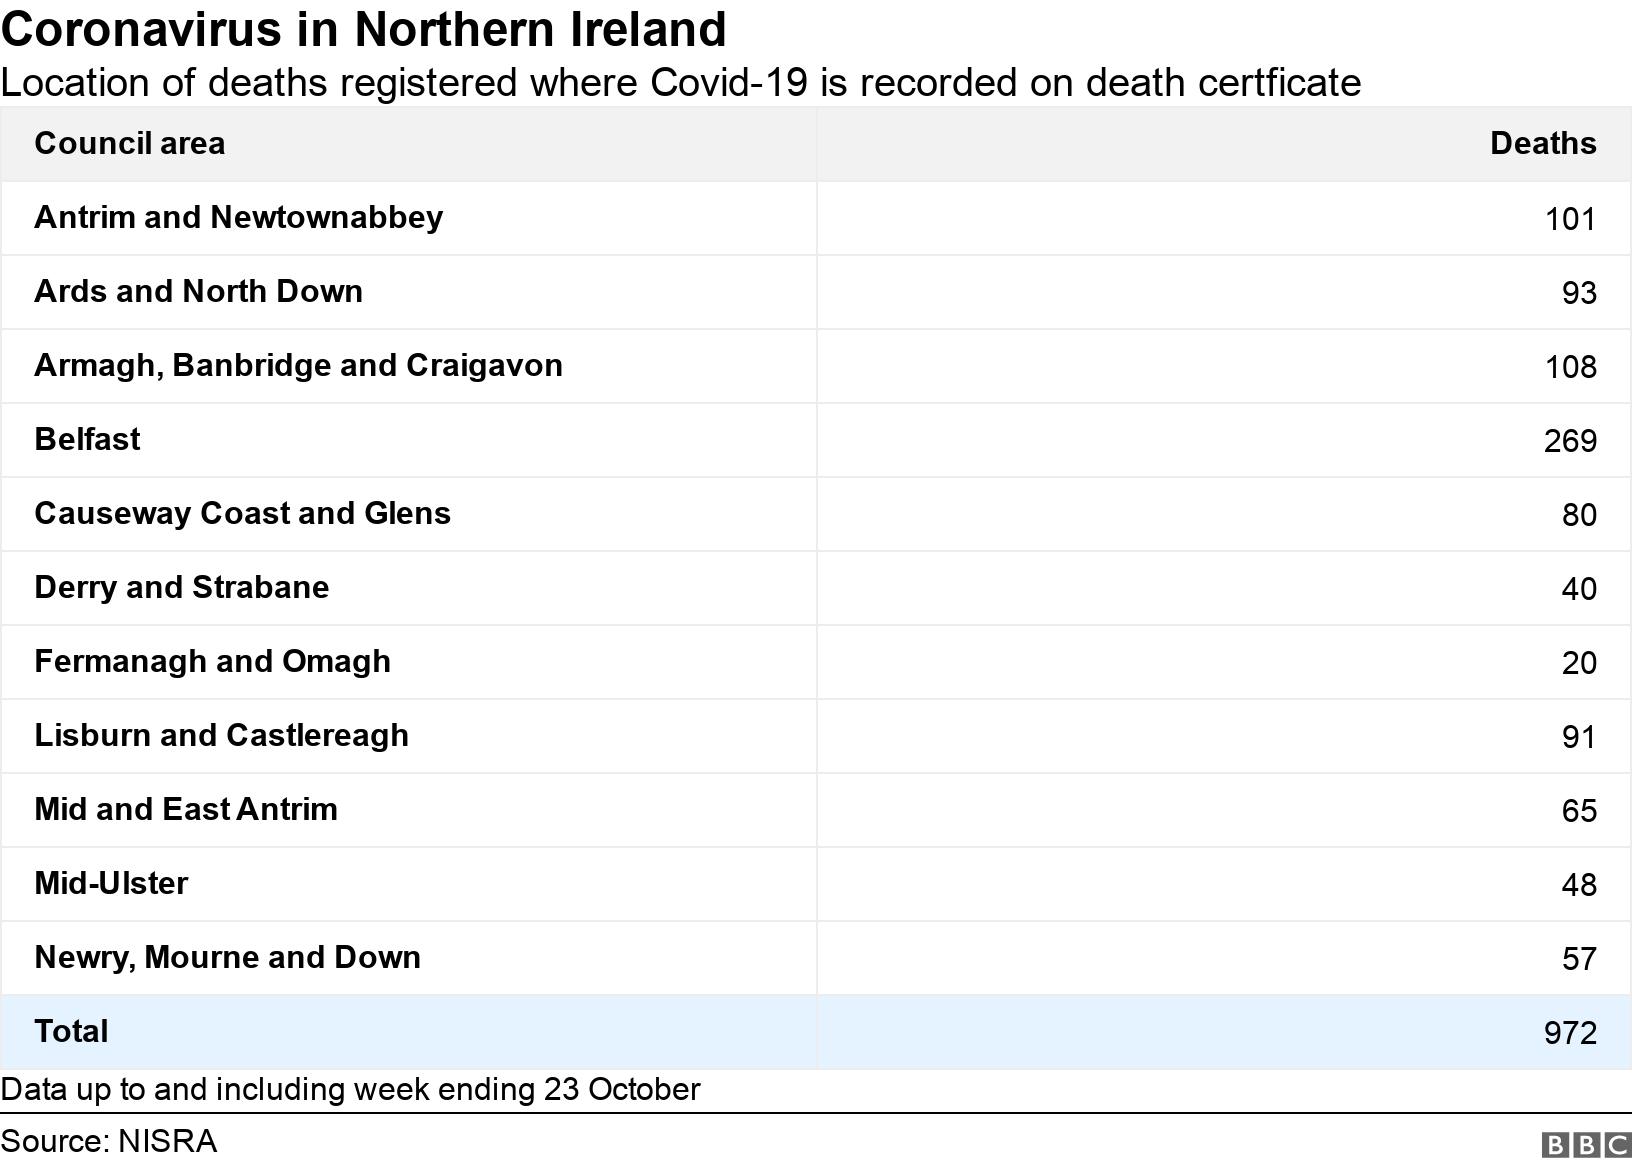 Coronavirus in Northern Ireland. Location of deaths registered where Covid-19 is recorded on death certficate. Data up to and including week ending 23 October.